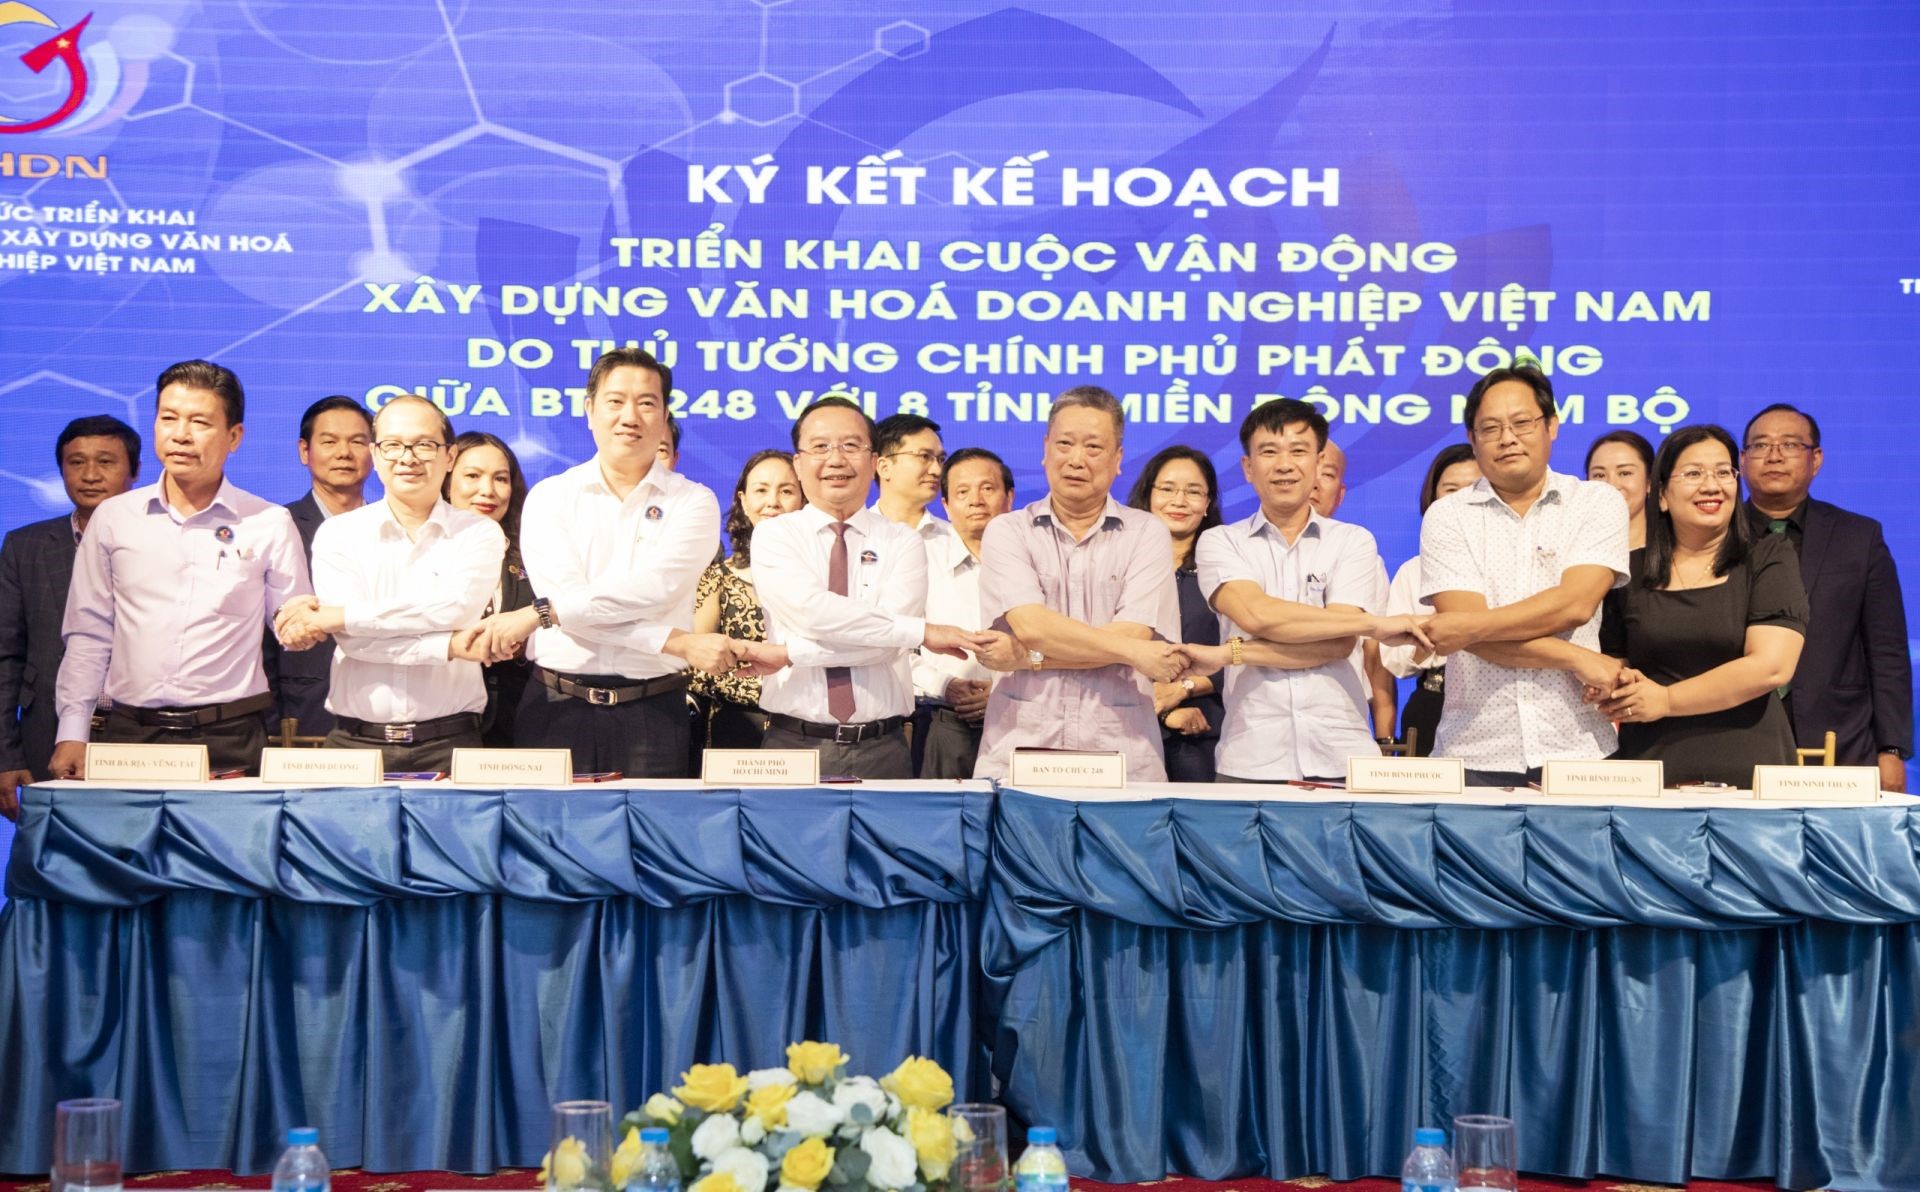 The conference deployed the set of criteria for Vietnamese business culture for 8 provinces in the Southeast region to affirm the position, role, and importance of corporate culture for sustainable economic development.